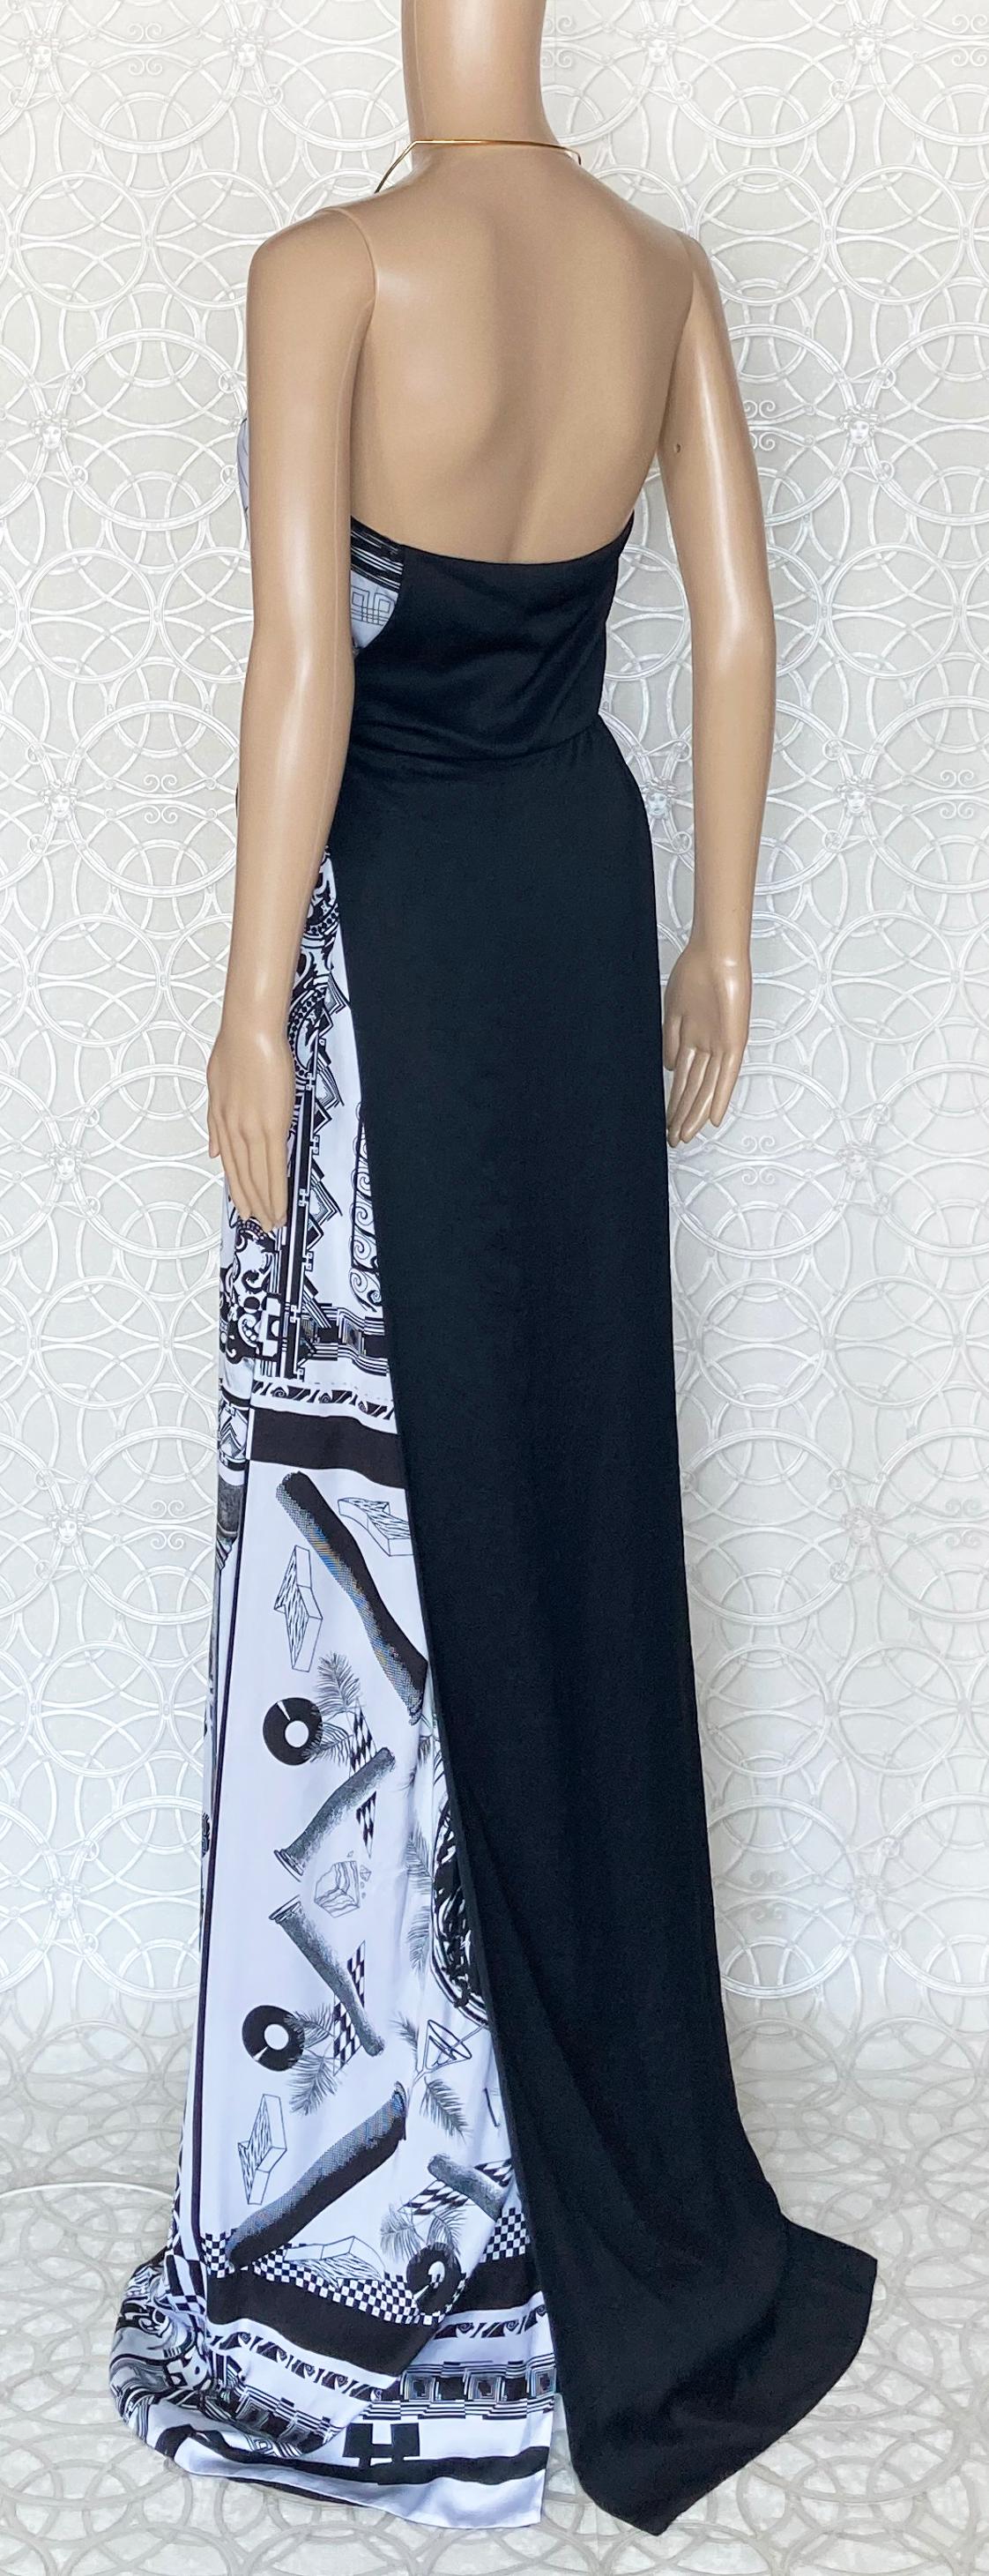 Versace VERSUS + Anthony Vaccarello iconic print maxi dress 38 - 2, 42 - 6 For Sale 5